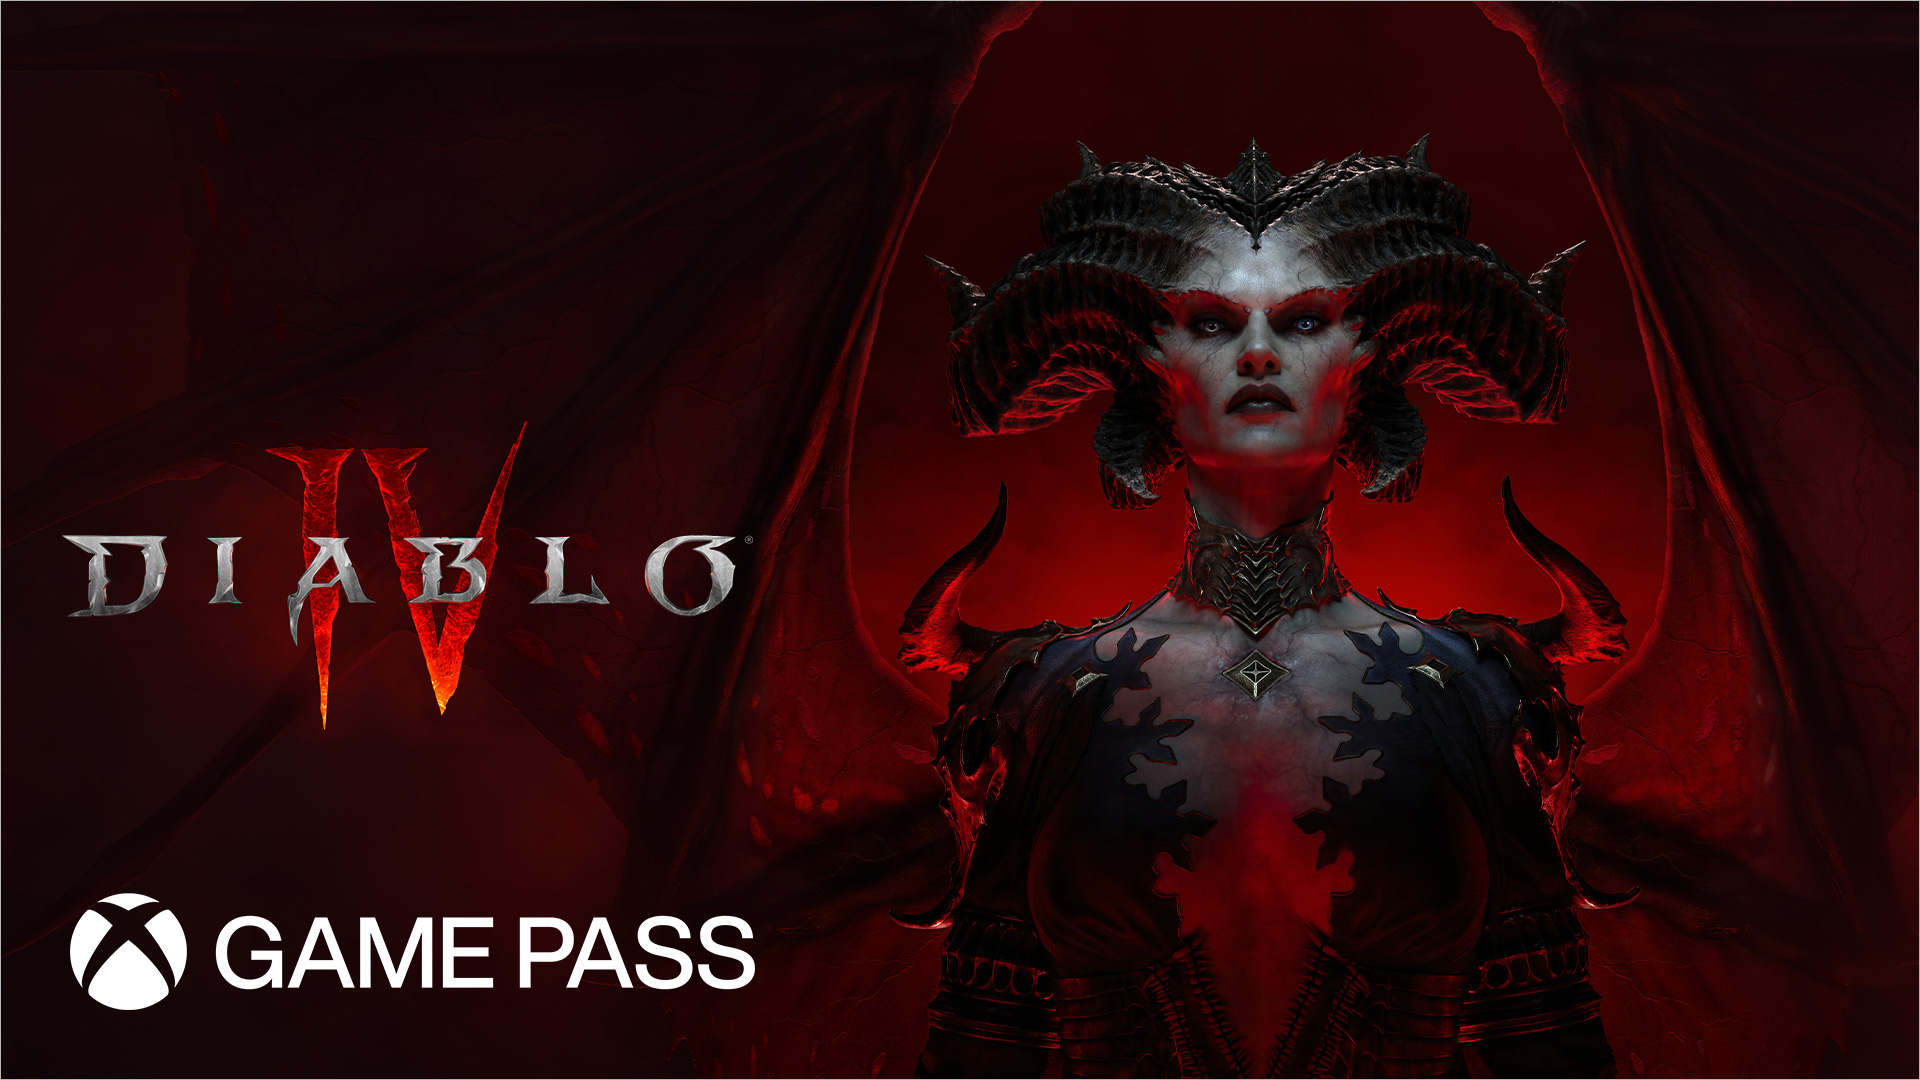 PSA: Diablo IV is now available on PC and XBOX with game pass